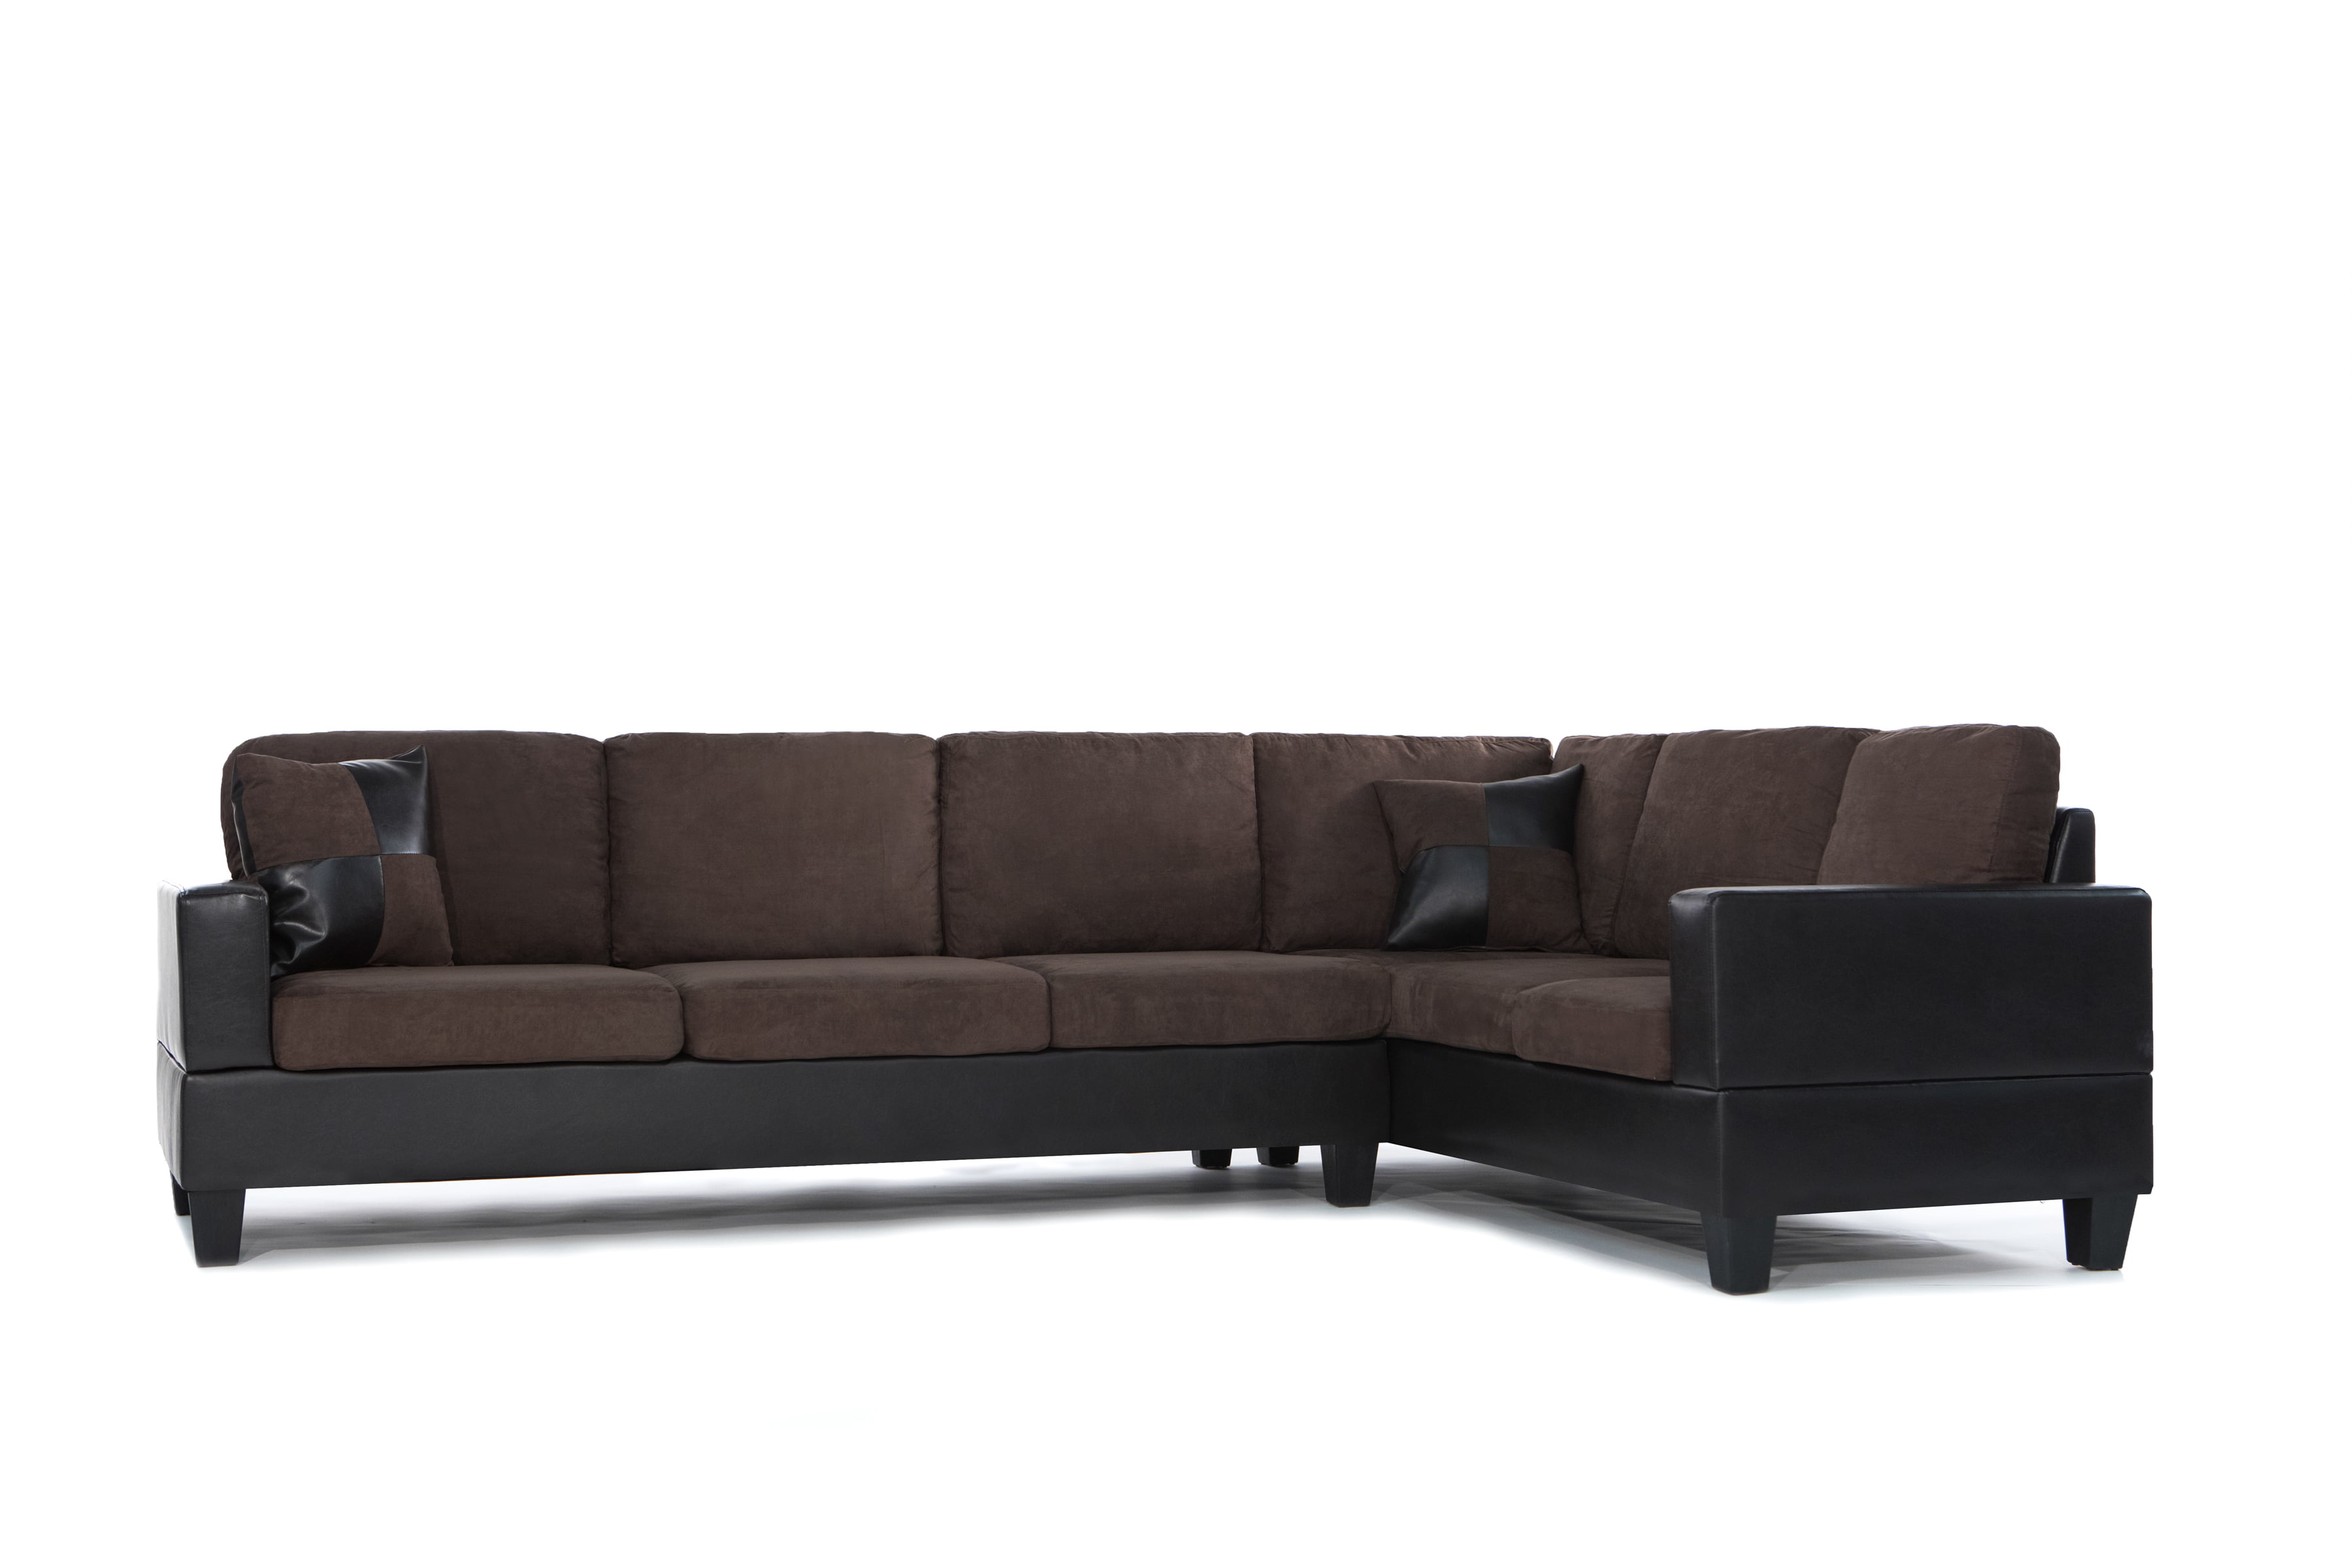 microfiber and faux leather sectional sofa